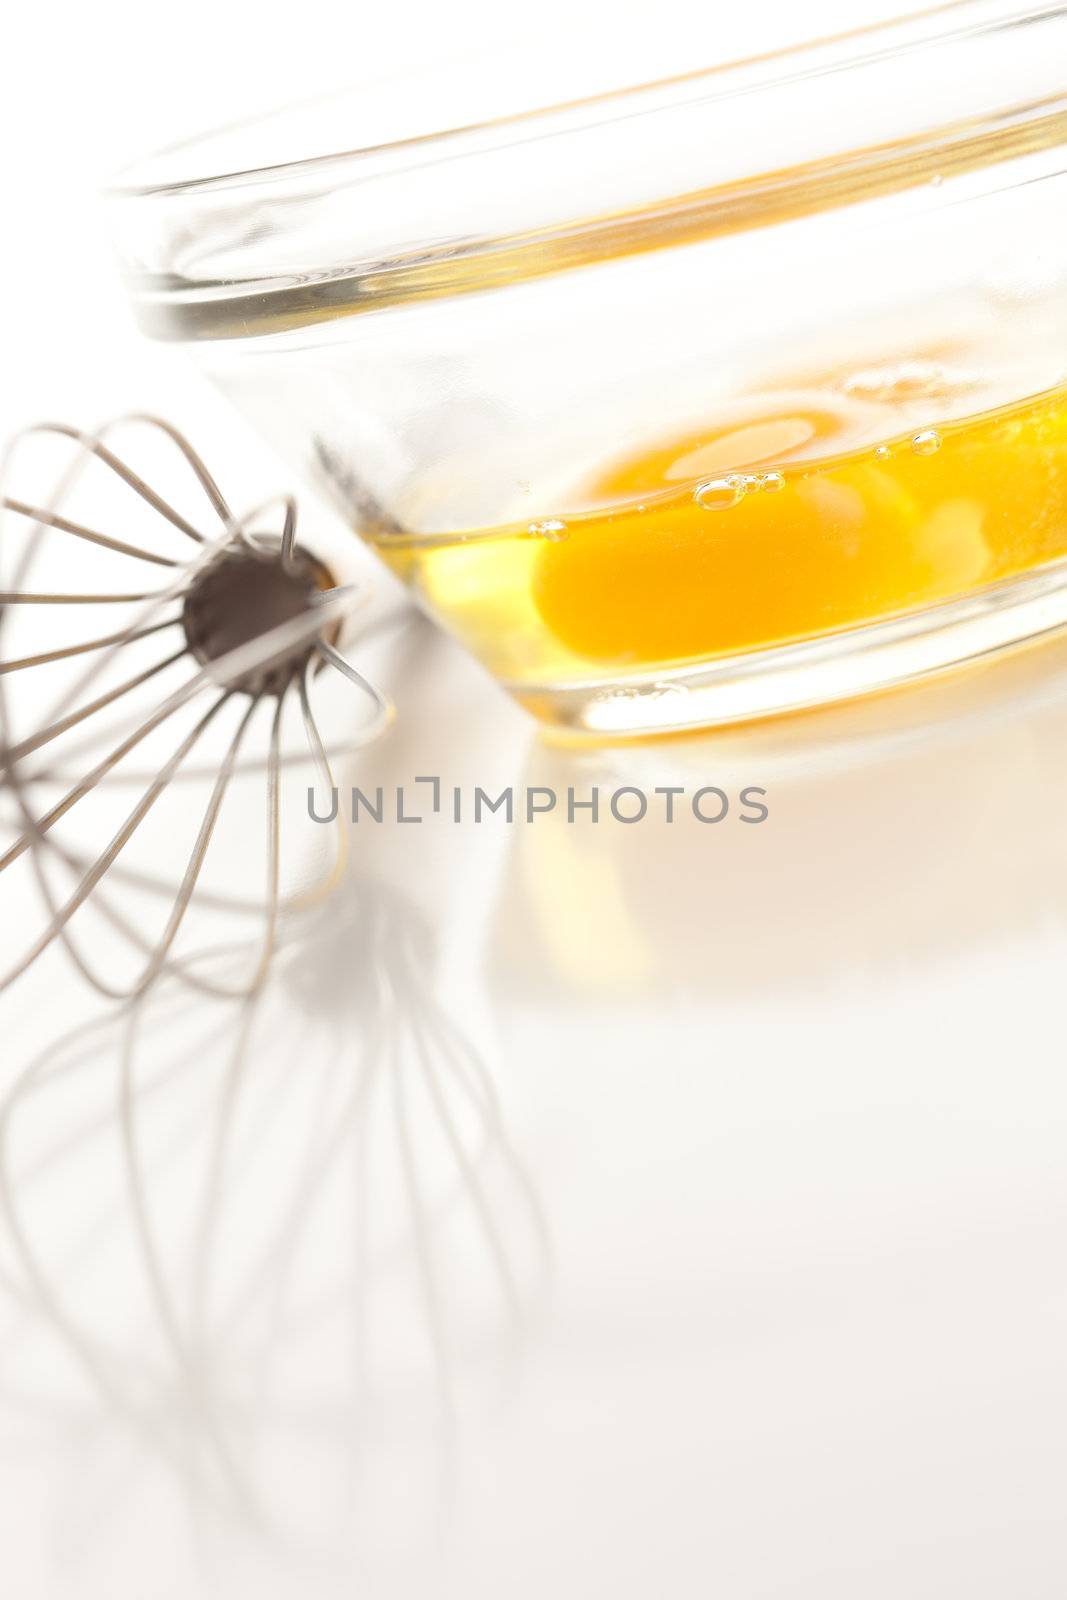 Hand Mixer with Eggs in Glass Bowl by Feverpitched